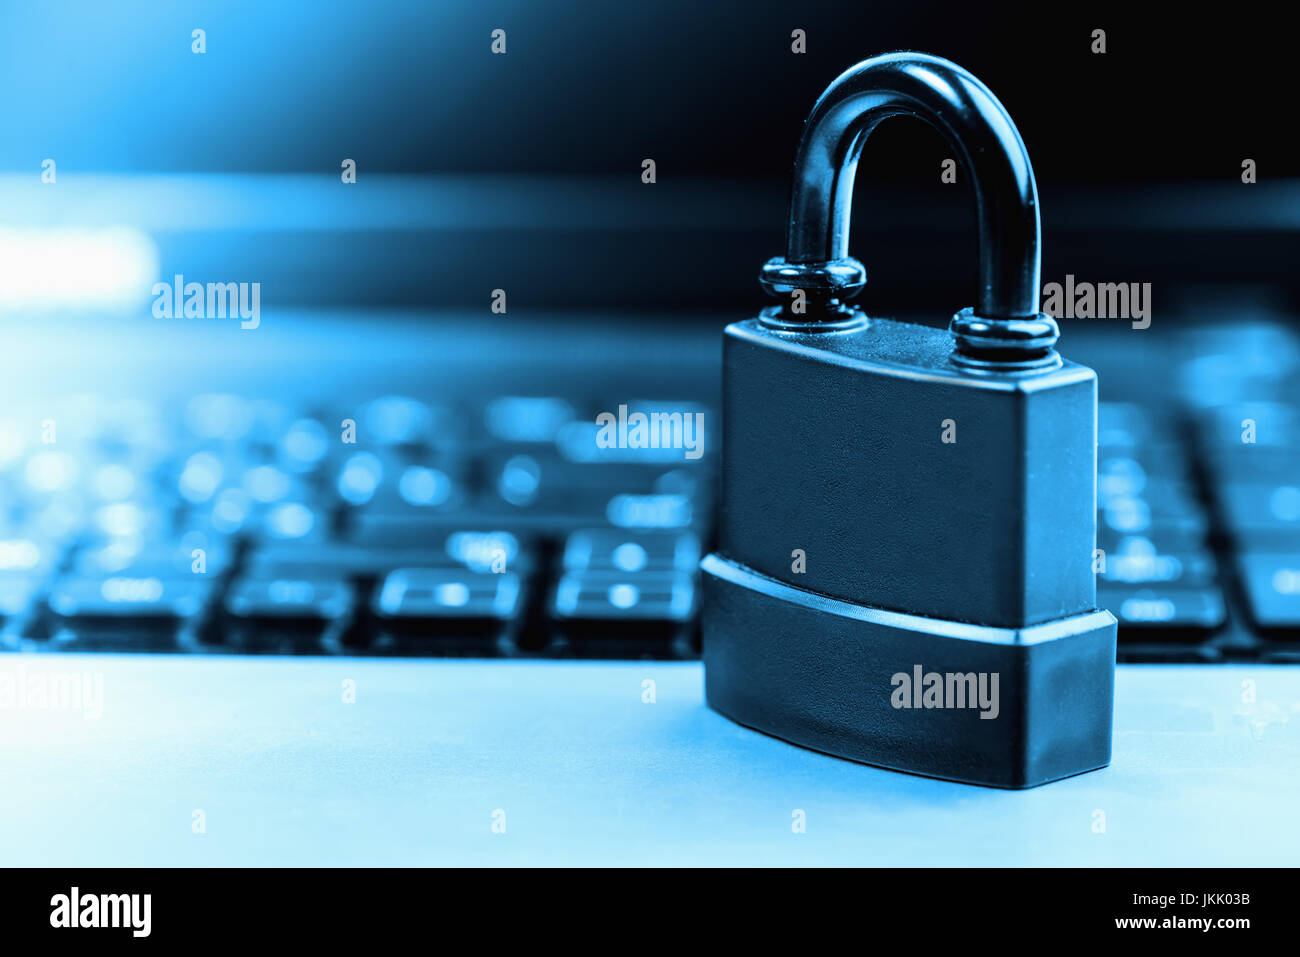 computer and online security with keyboard and padlock Stock Photo